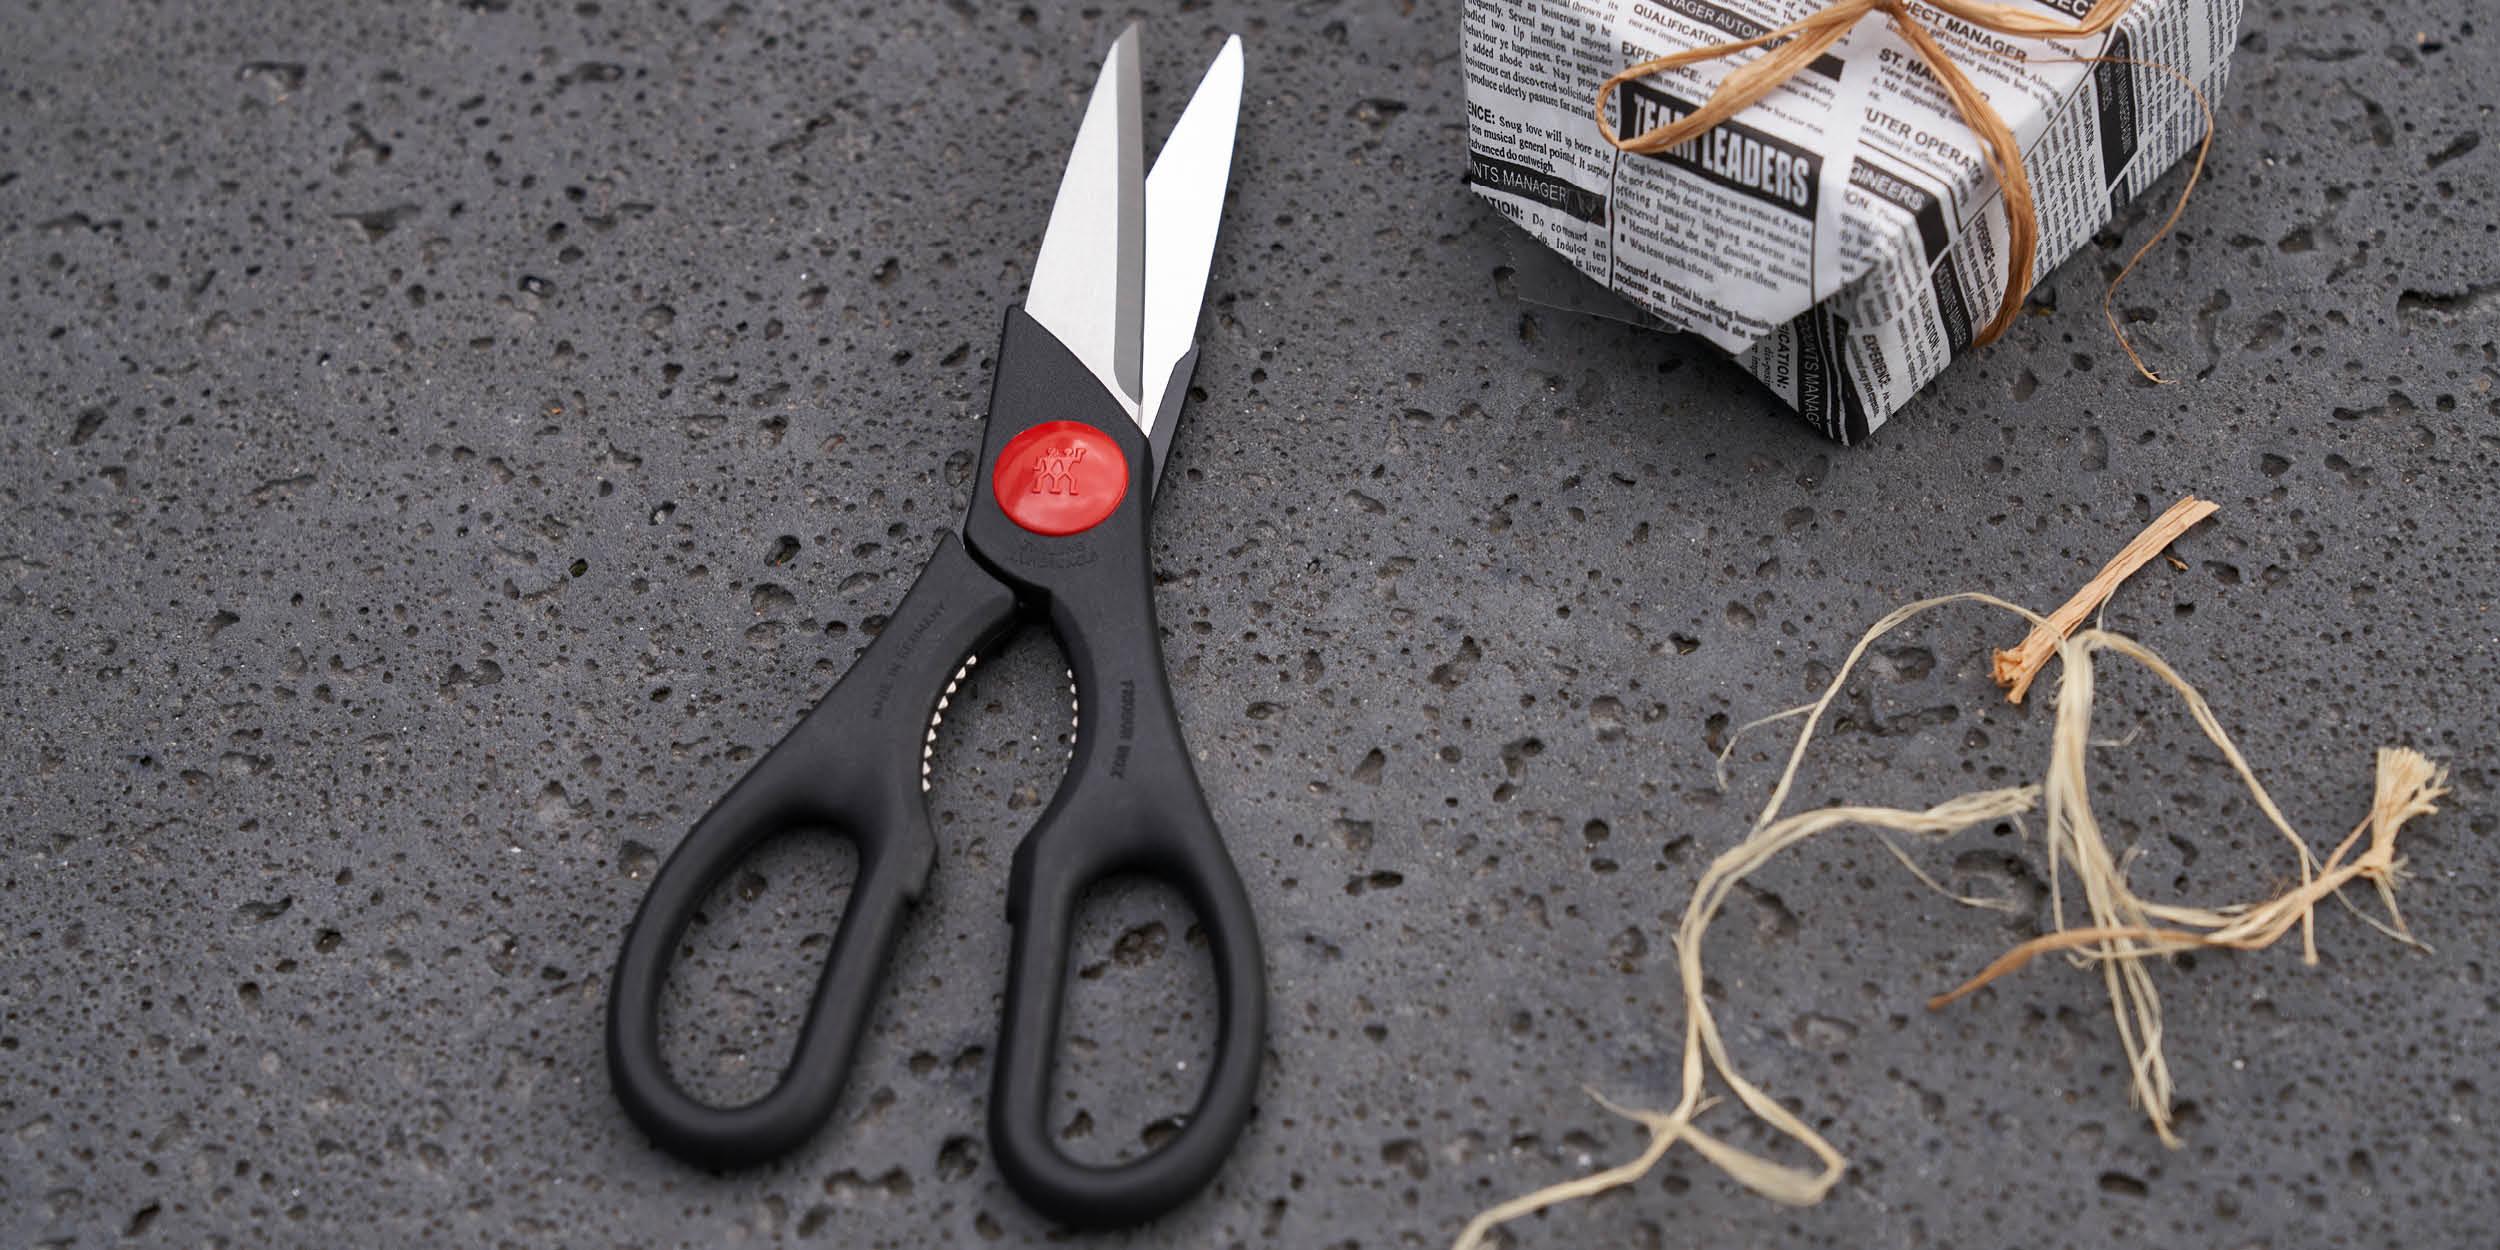 https://www.zwilling.com/on/demandware.static/-/Sites-zwilling-us-Library/default/dw4476d2de/images/product-content/masonry-content/zwilling/tools-gadgets/kitchen-shears/43967-200-0_Lifestyle_Image_Series_OS_1200x600.jpg